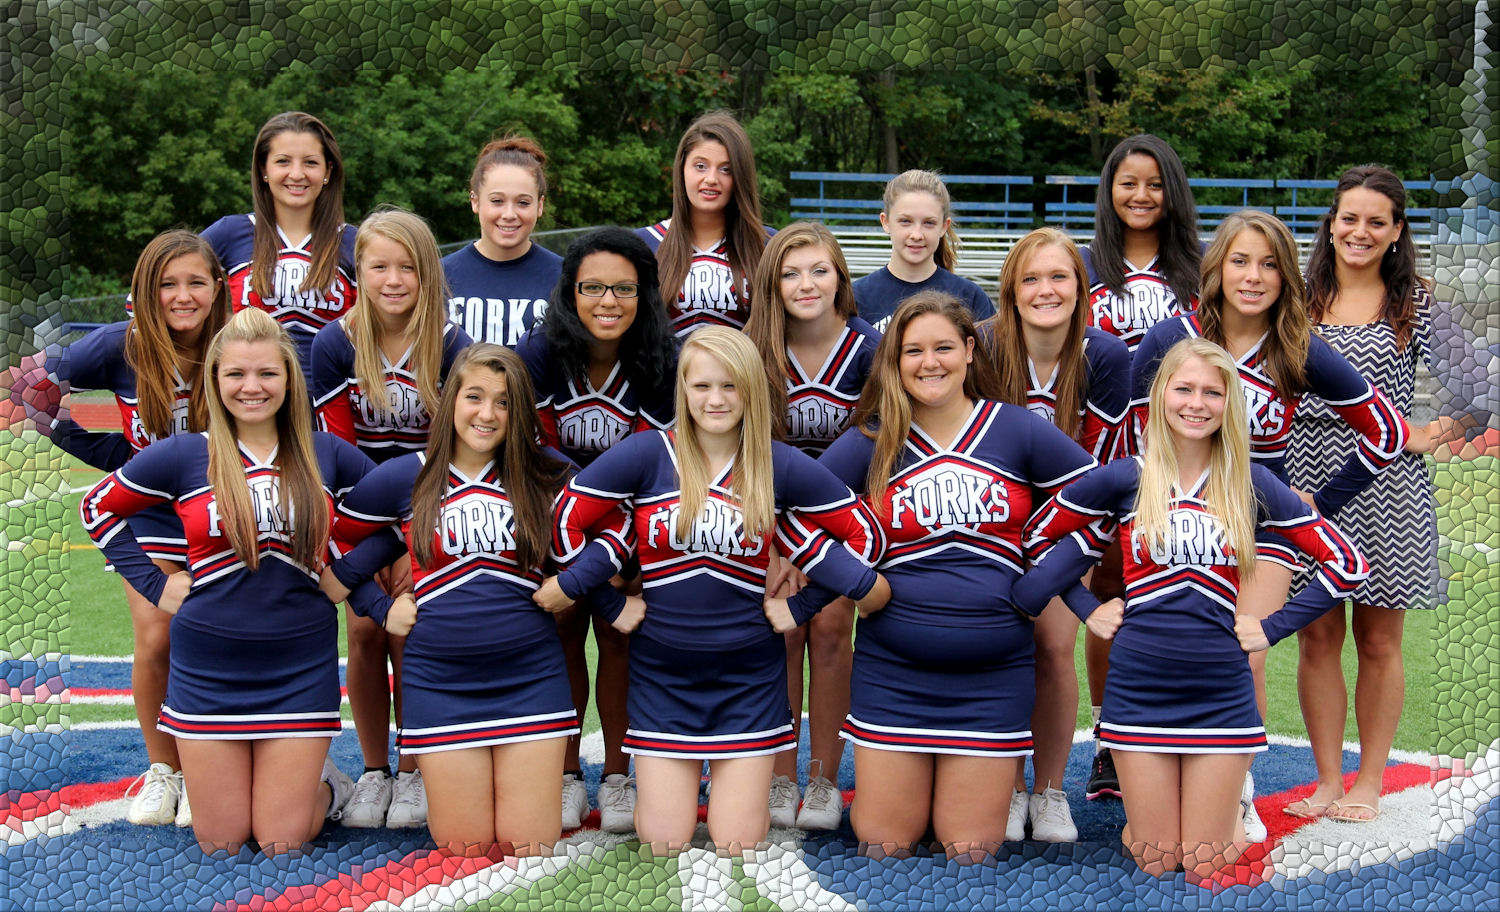 W. L. The 2013 Chenango Forks Football Cheerleader Squad (click on image fo...